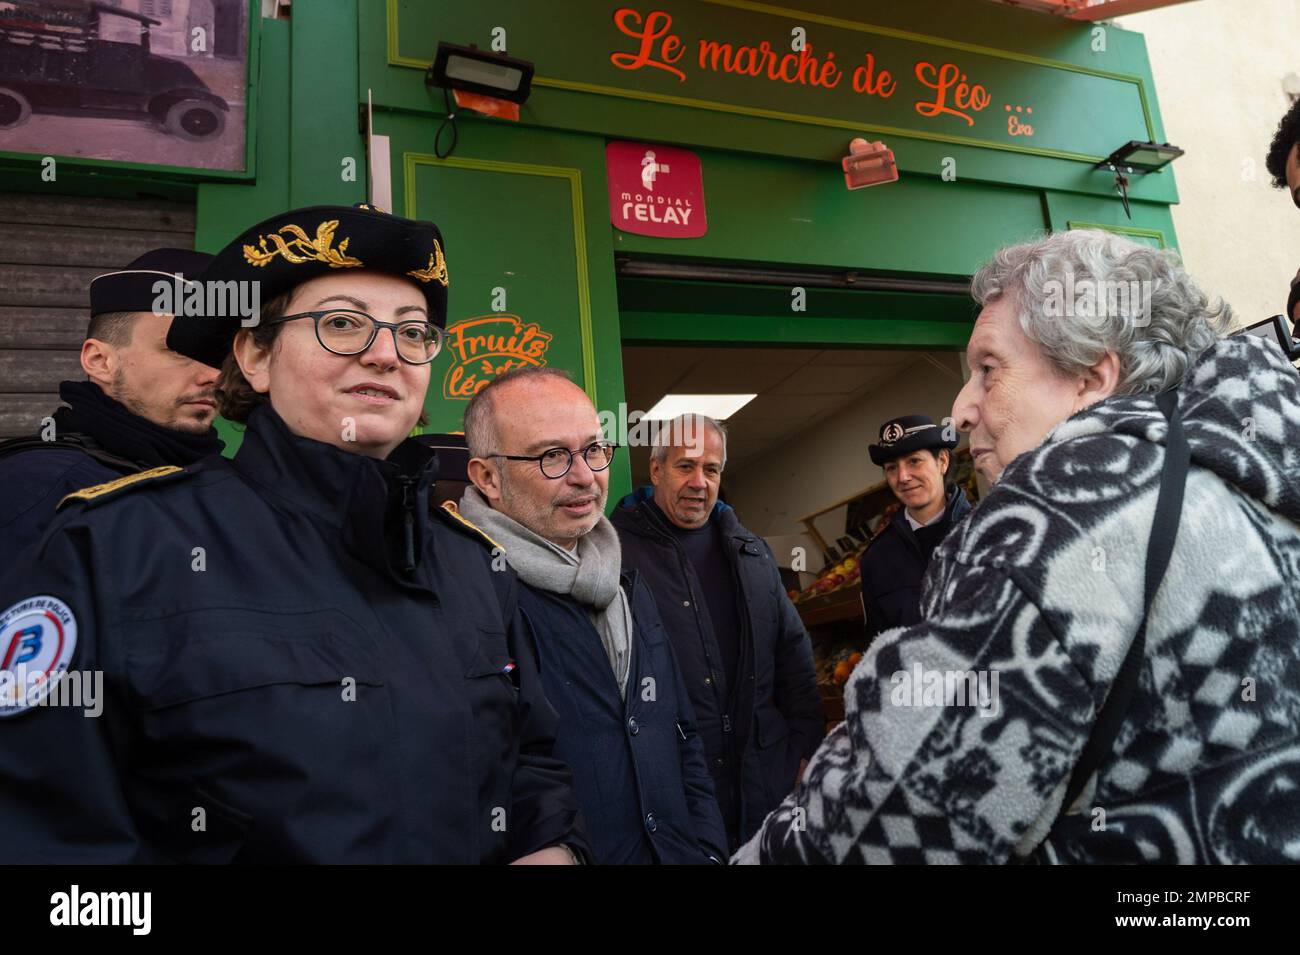 January 27, 2023, Marseille, France: Frederique Camilleri (L) and Lionel Royer-Perreaut (L2) talk to an elderly woman (R) who complains about the feeling of insecurity in the 9th district of Marseille French MP Lionel Royer-Perreaut and police prefect Frederique Camilleri visited the 9th district police station in Marseille to see its state of disrepair following the announcement by the Minister of the Interior that it would not be closed as had been envisaged. They took part in a patrol in the streets of the district and questioned the inhabitants about the effectiveness of the police presenc Stock Photo